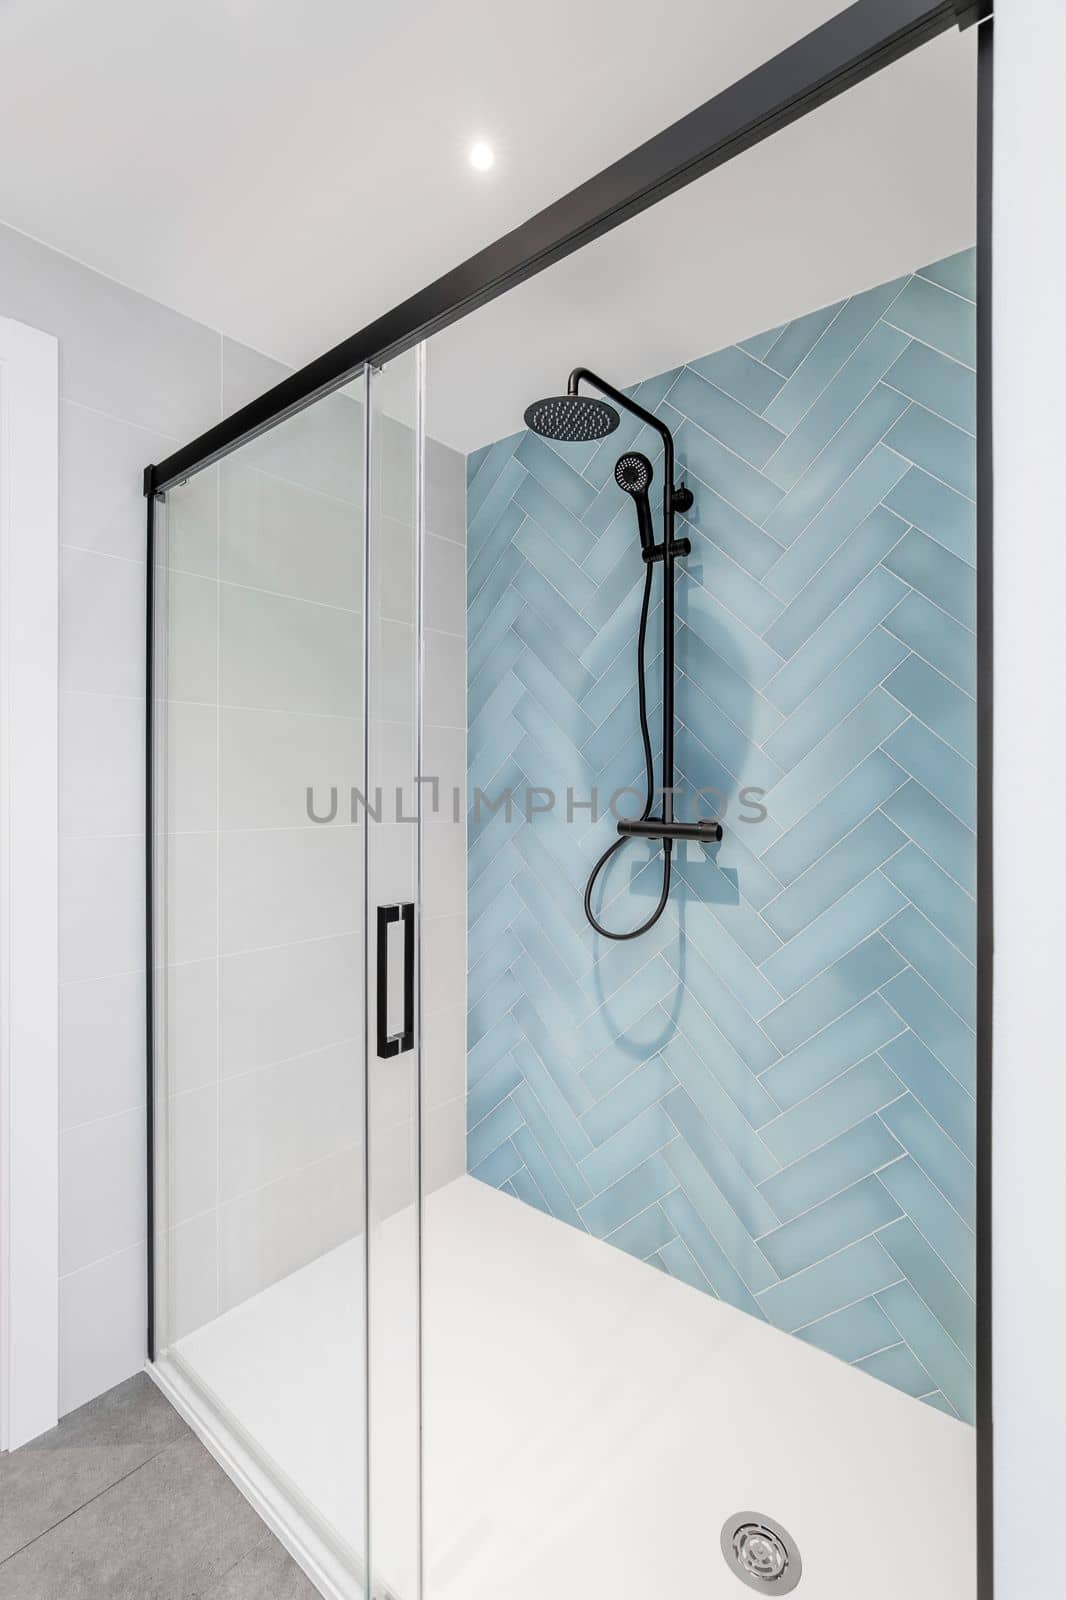 White bathroom with glass shower, walls are decorated with herringbone tiles in pale blue Black shower system enclosure with dark matte framed sliding glass door. Bright modern and stylish bathroom